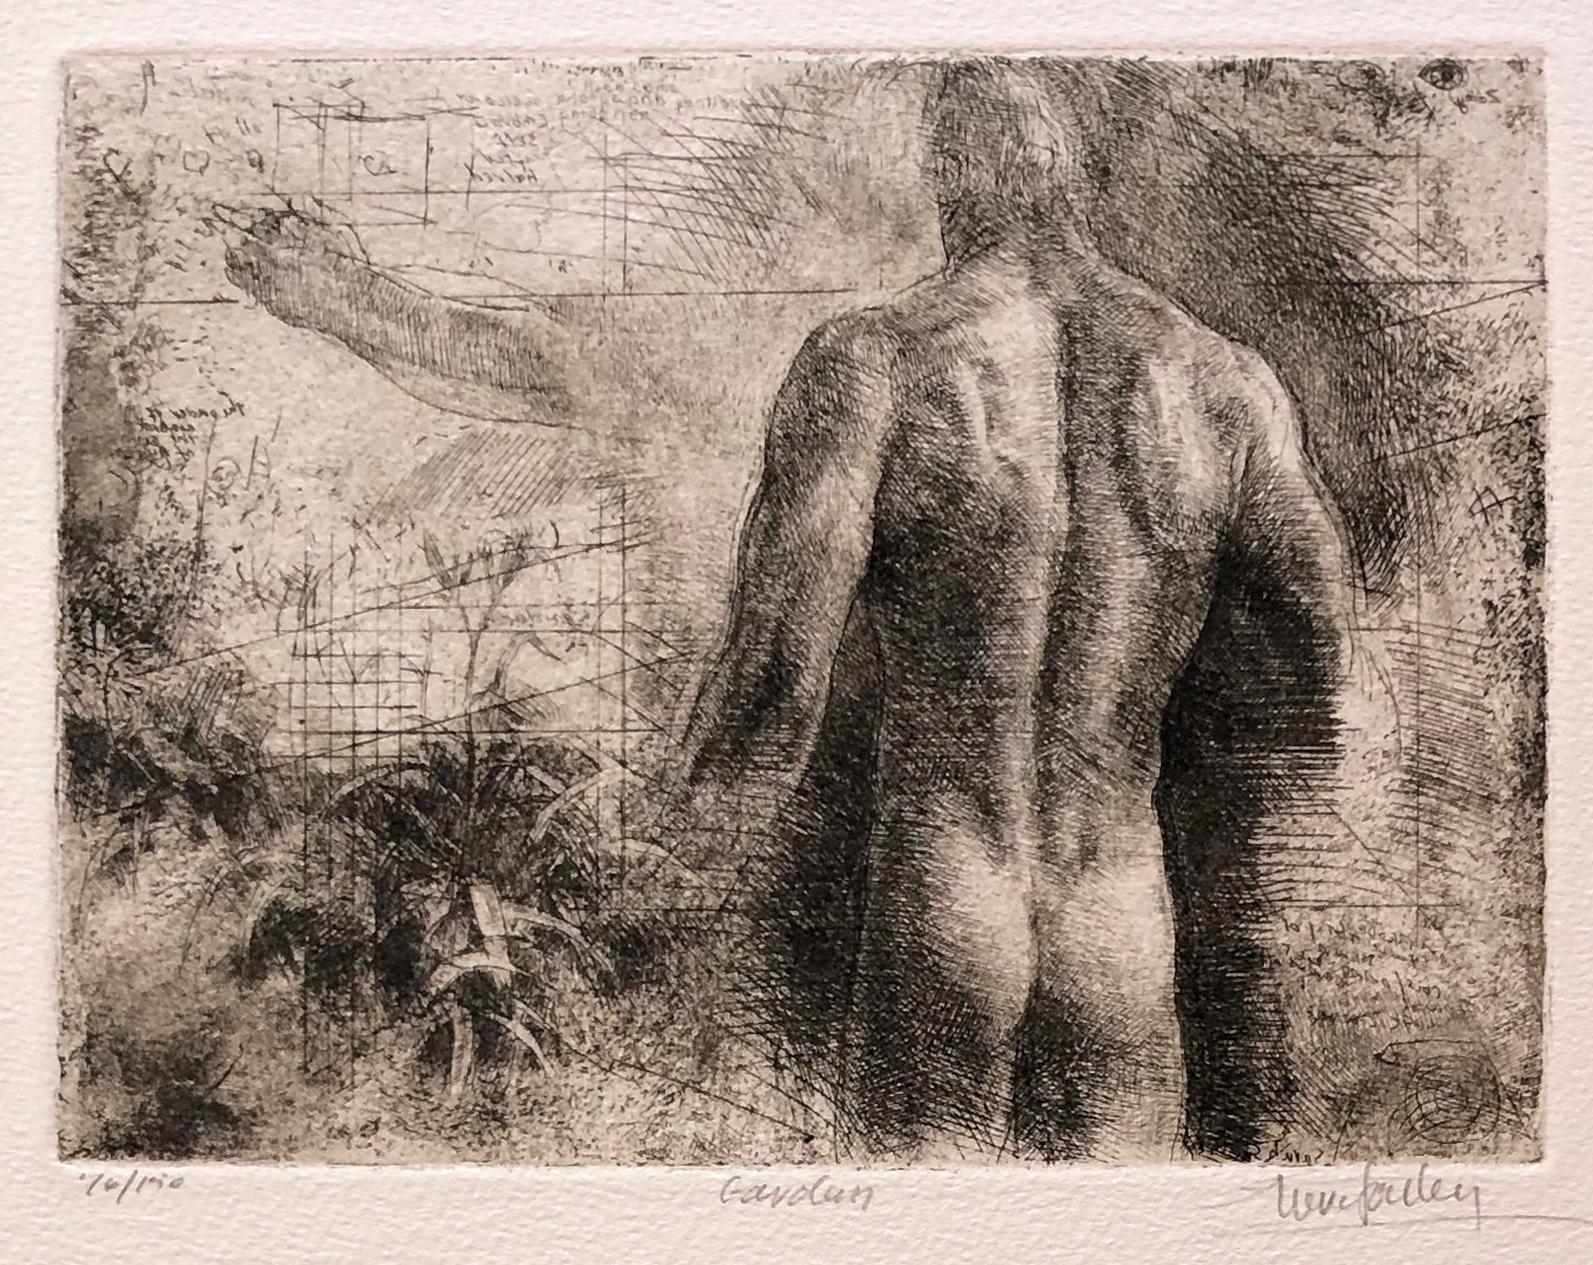 Male nude etching by Trevor Southey.
Medium: Etching
Year: 1994
Edition of 150
Image Size: 8 x 6 inches

Trevor Southey was born in Rhodesia, Africa (now Zimbabwe) in 1940. His African heritage can be traced to European colonists who settled in Cape